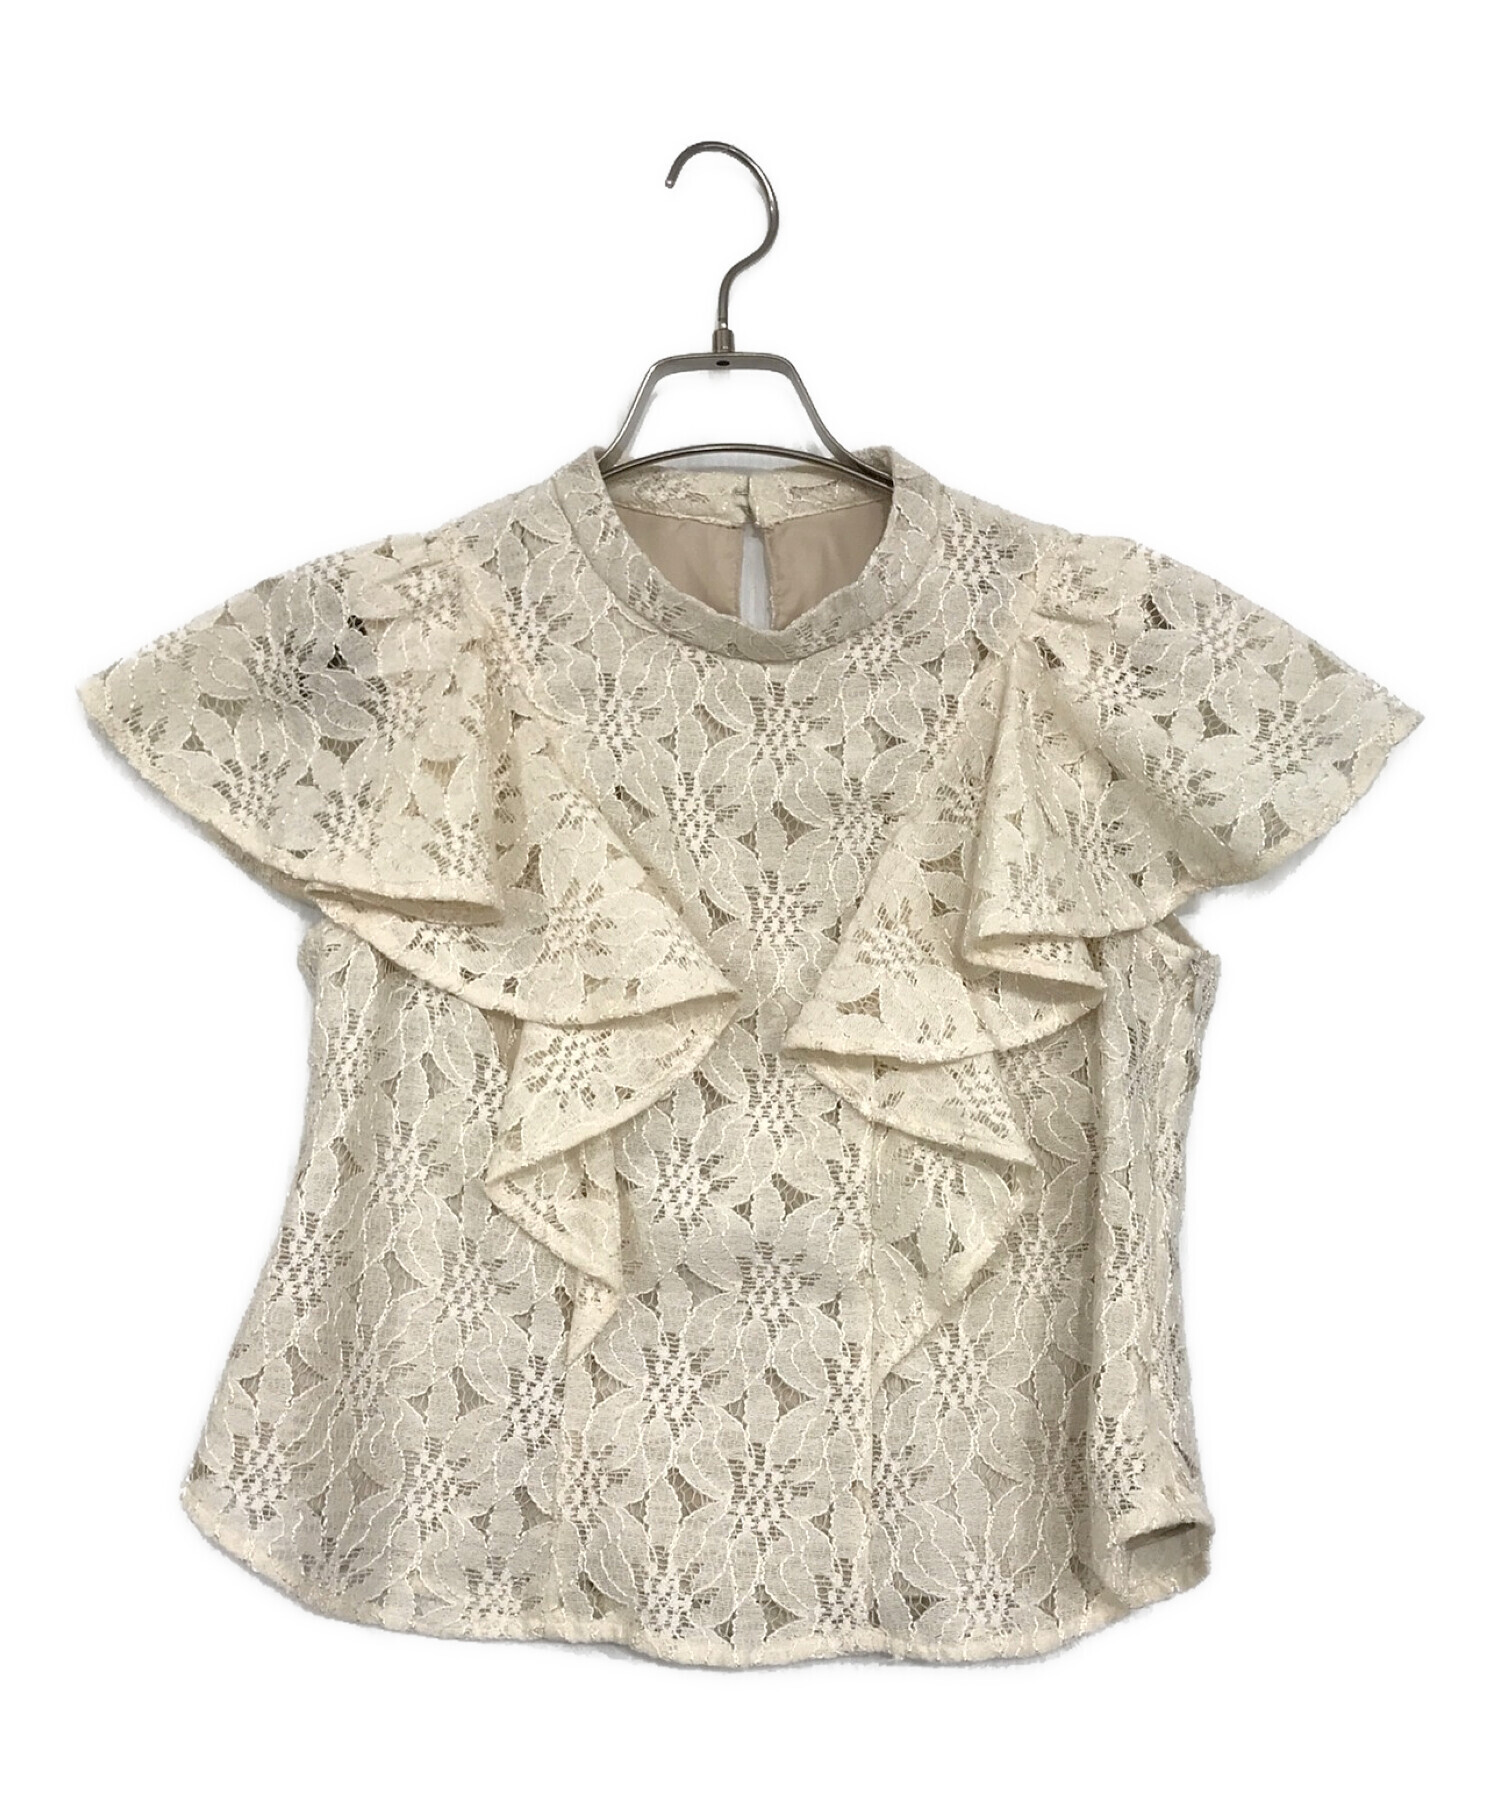 Floral Lace Ruffled Top  Sサイズ